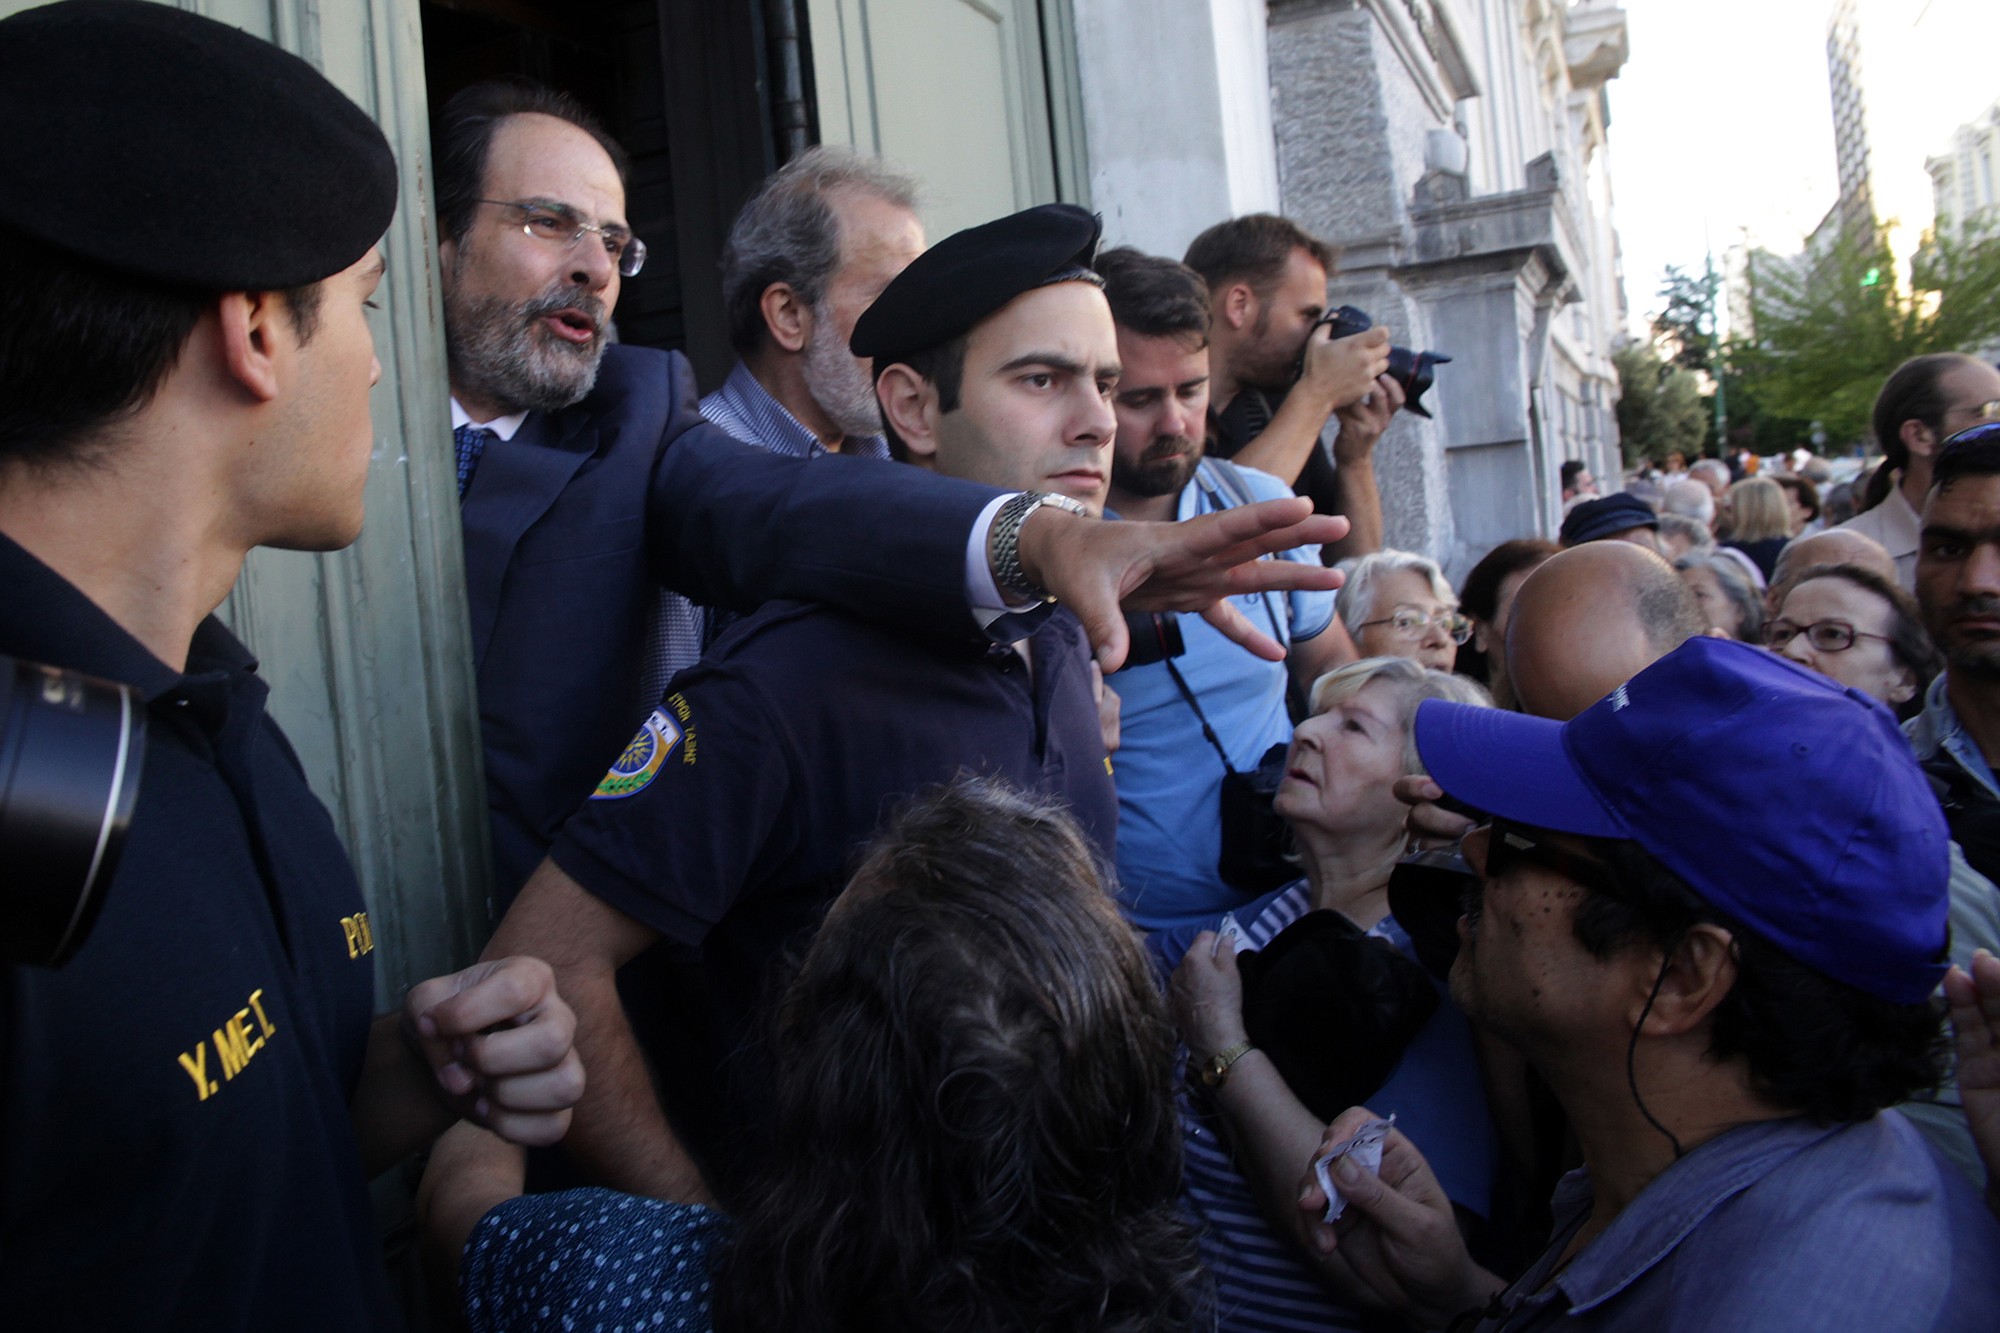 The manager of National Bank of Greece branch asks from the pensioners to stay calm at they wait to enter the building in Athens, Wednesday, July 1, 2015. Pensioners are the forgotten victims of the Greek crisis. Their monthly payments have been cut in recent years, and since many lack bank cards they were totally cut off from their funds until Wednesday?s special bank sessions allowed them partial access.